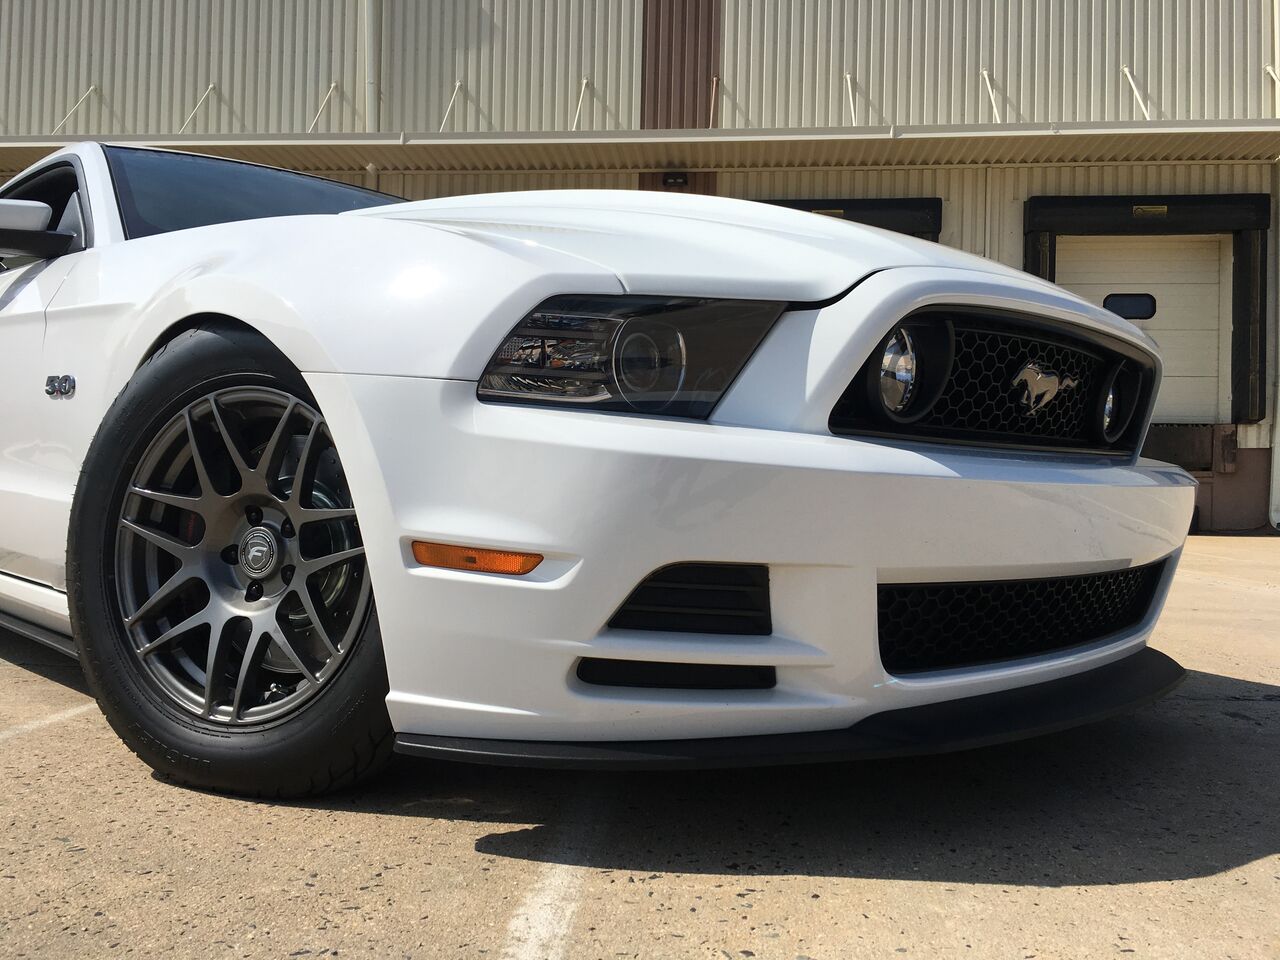 American Muscle's Roush-Supercharged 2014 Mustang GT